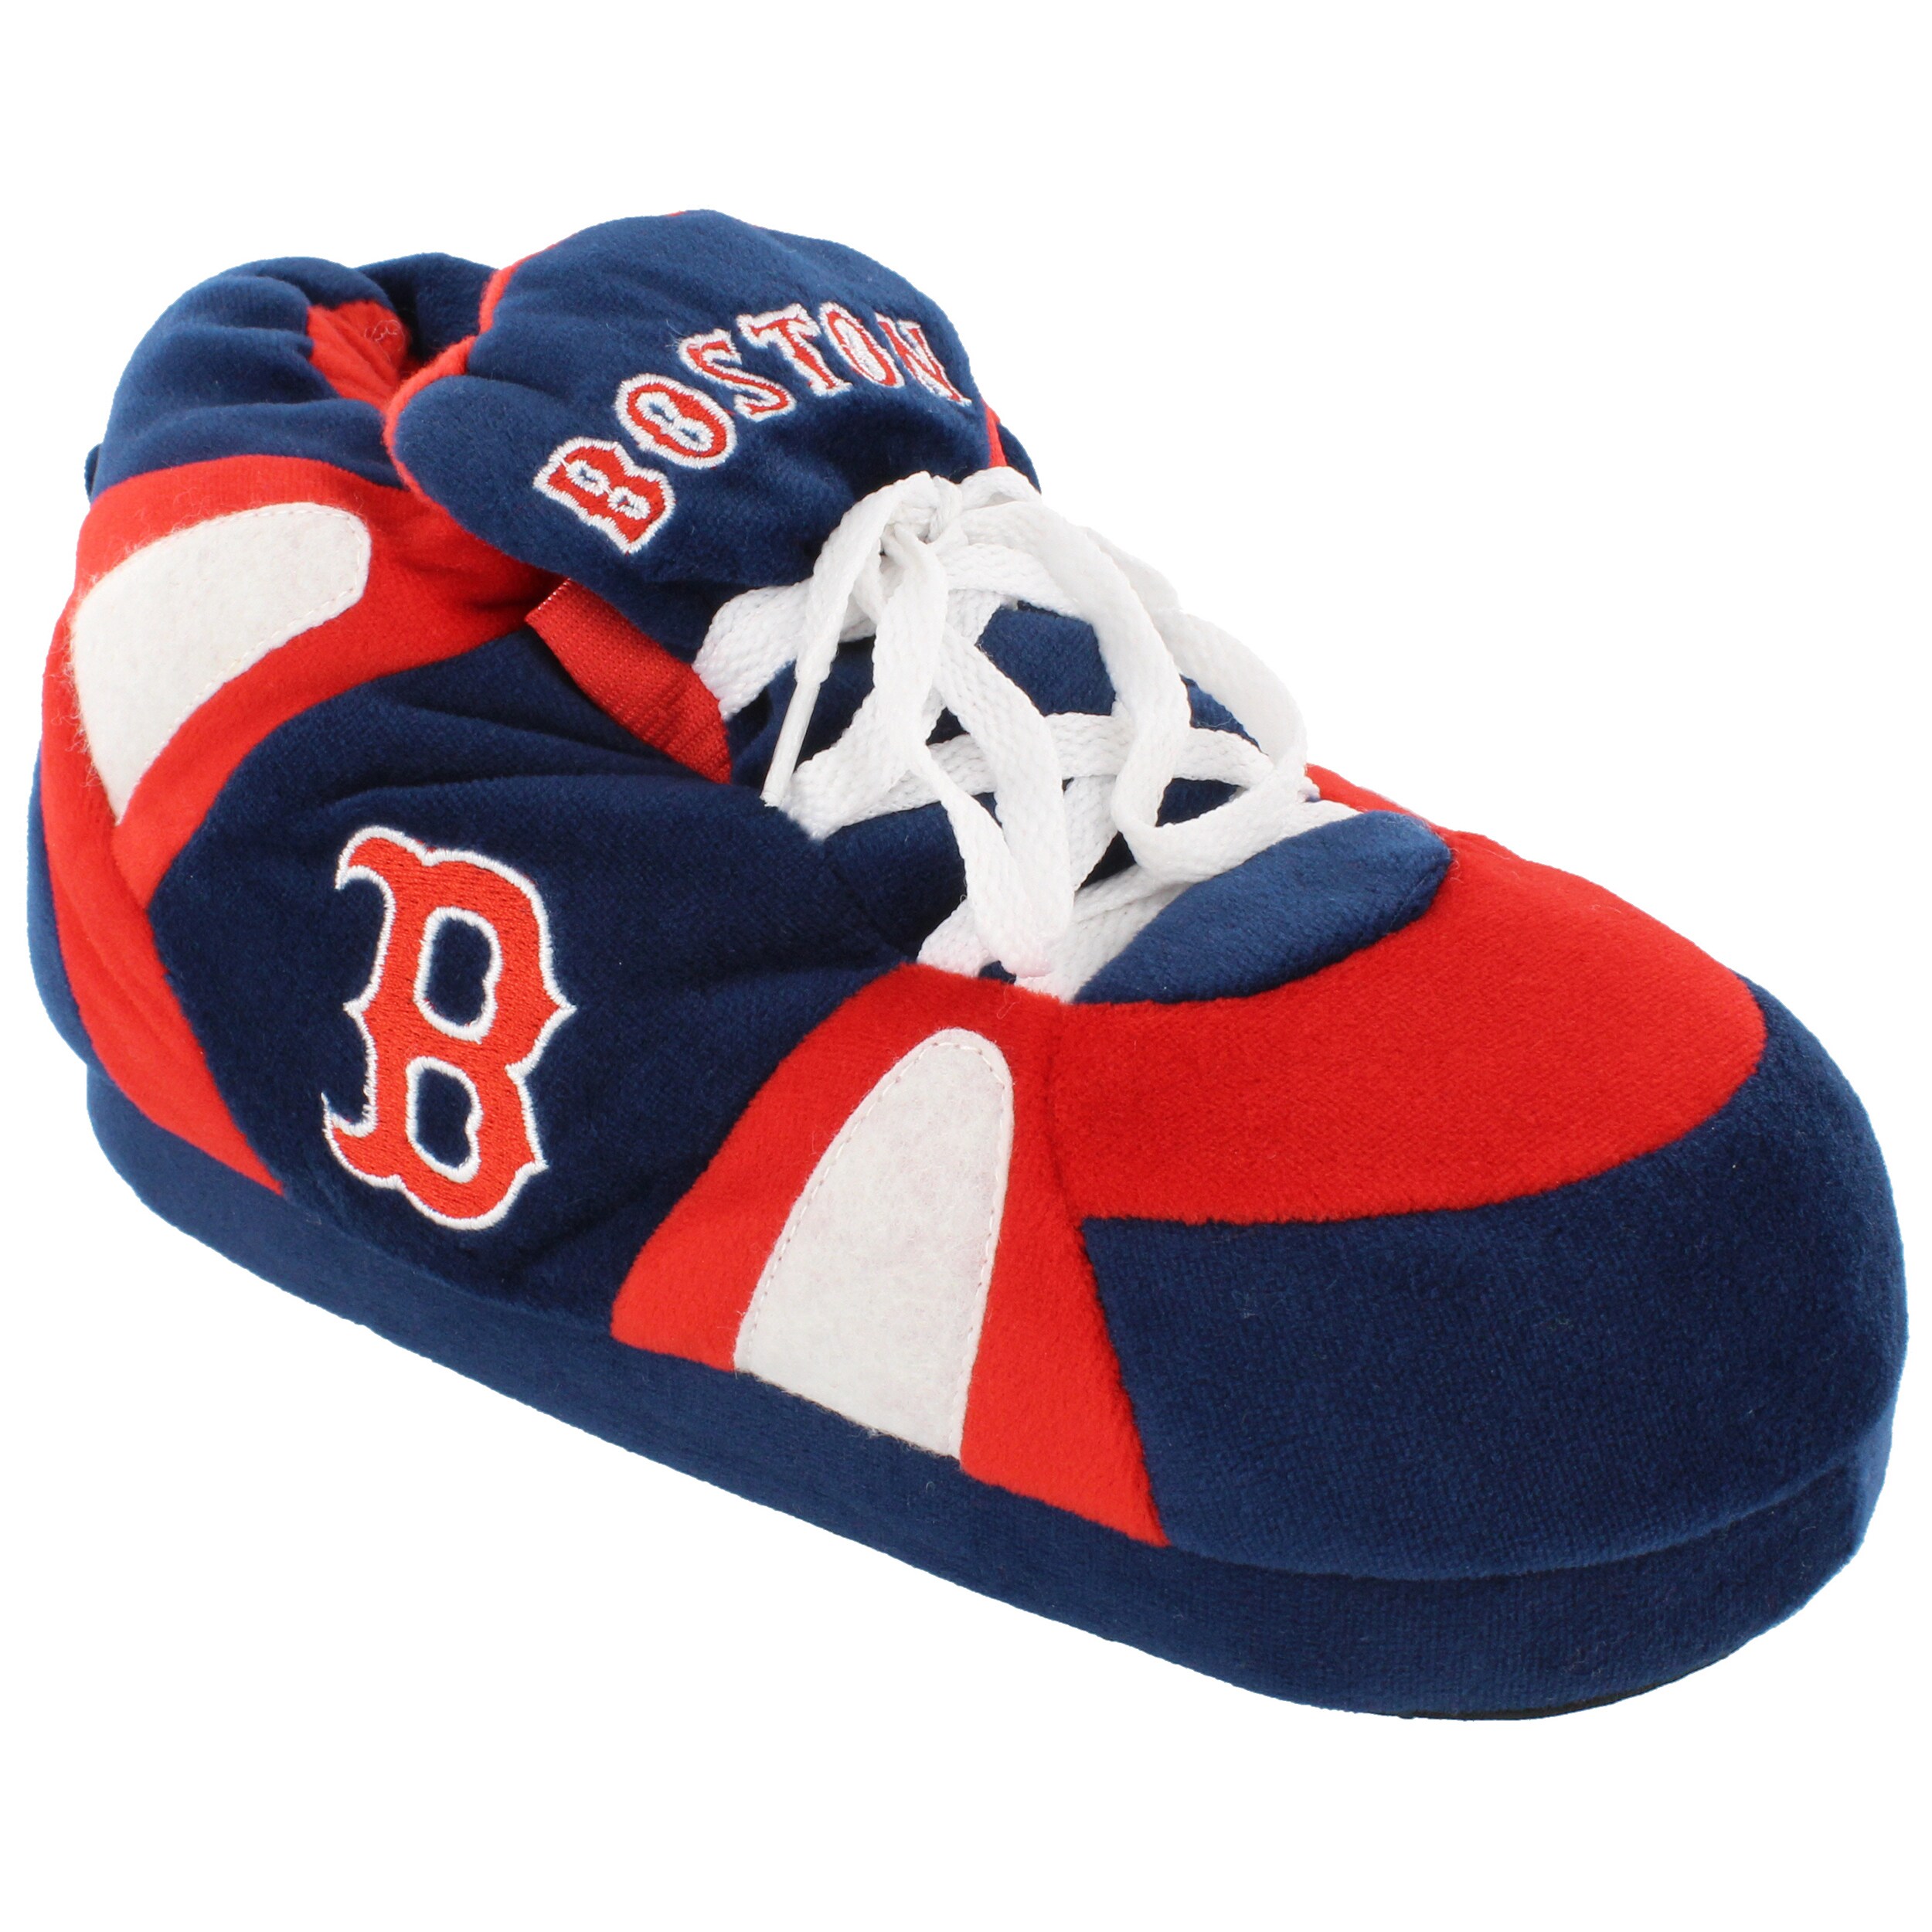 Shop Black Friday Deals on Boston Red 